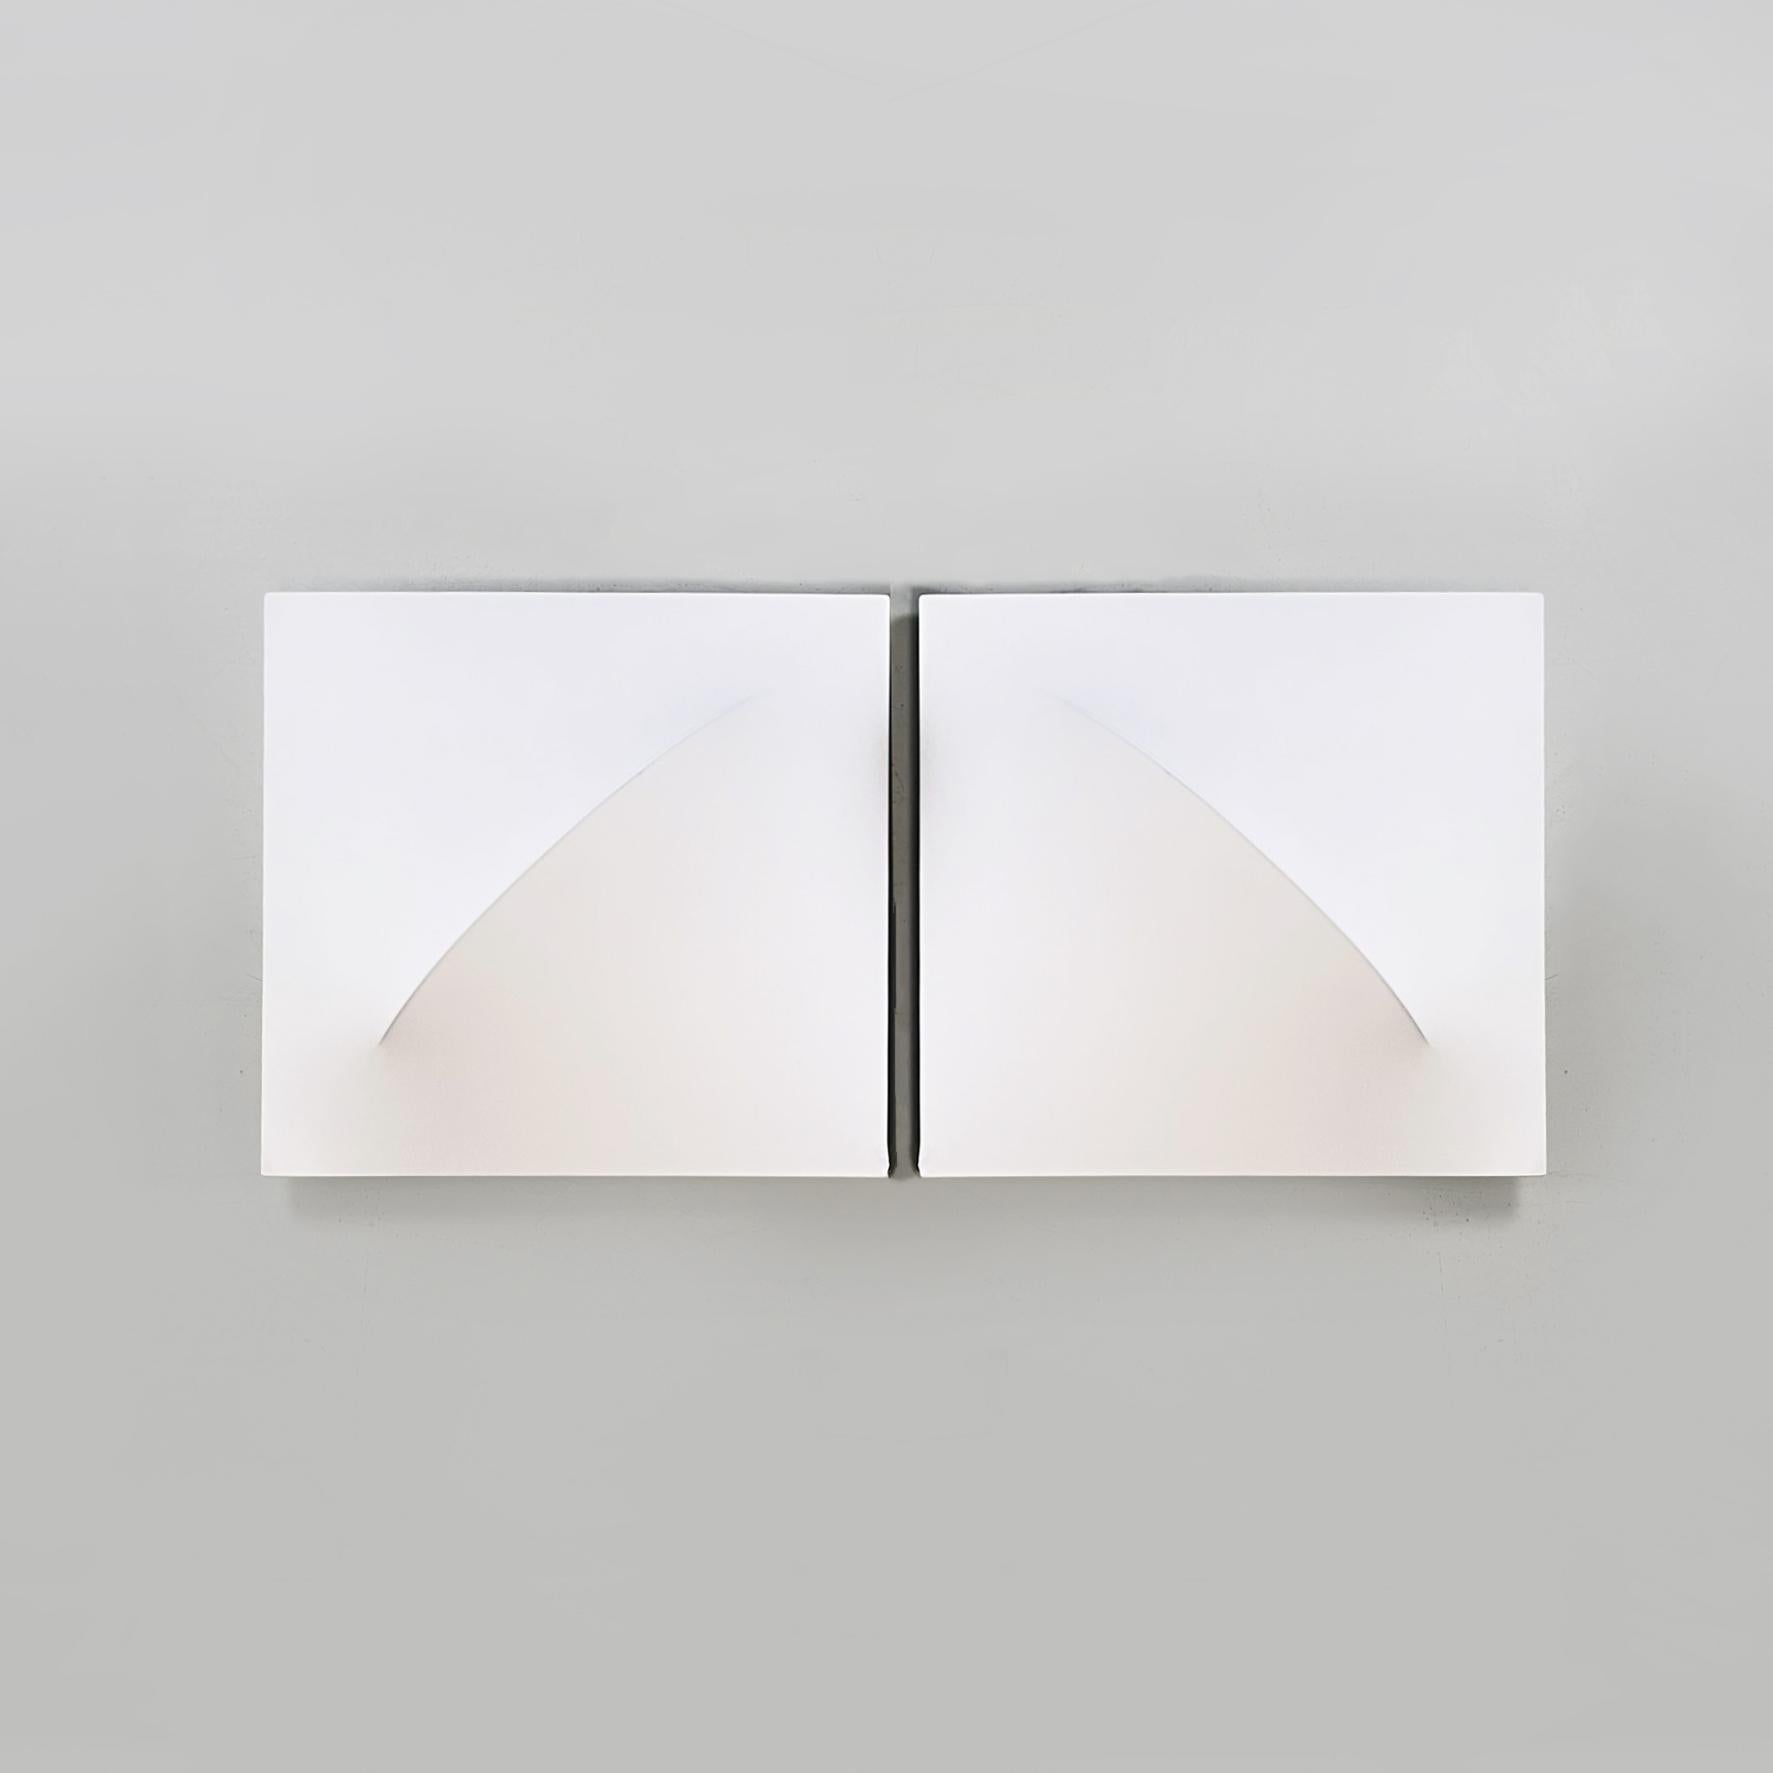 Italian modern pair of white stretch jersey fabric Saori appliques or wall lamps by Kazuhide Takahama for Sirrah, 1980s.
Pair of Saori model appliques or wall lamps with a square-based structure and metal arch, covered with a removable and washable